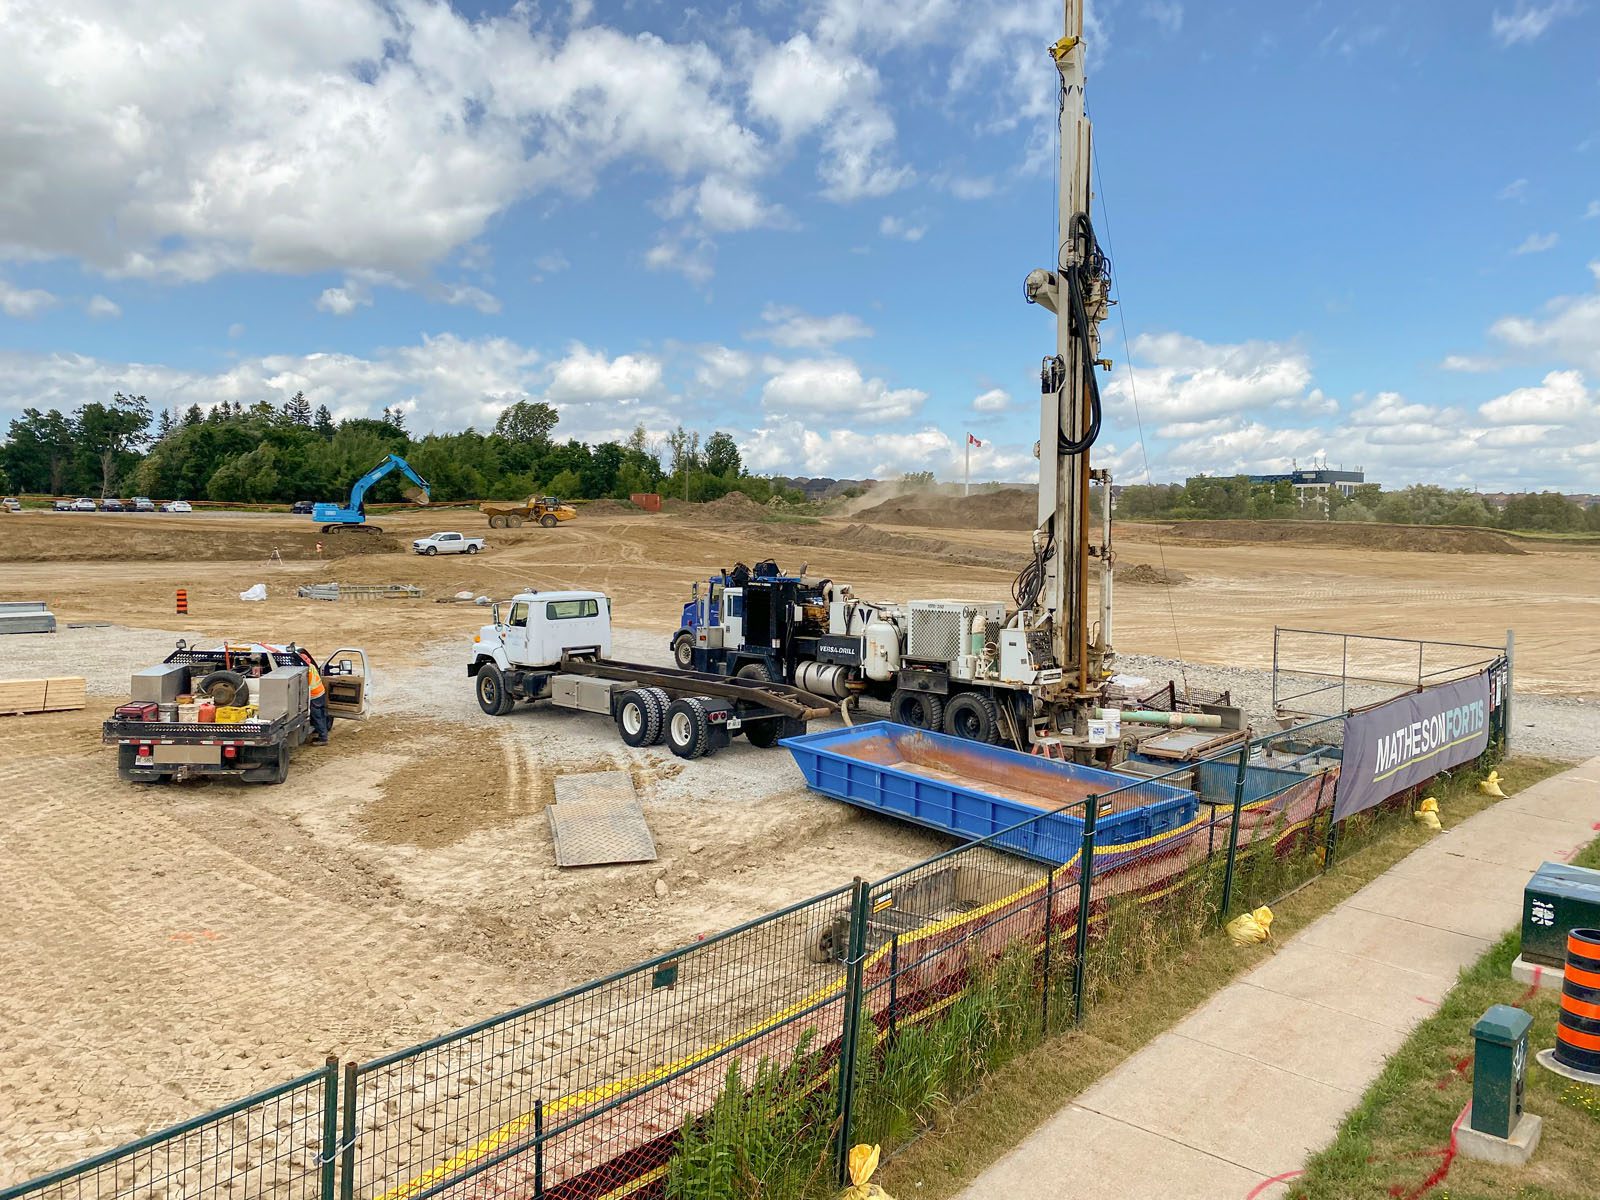 Well Drilling Rig on Construction Site